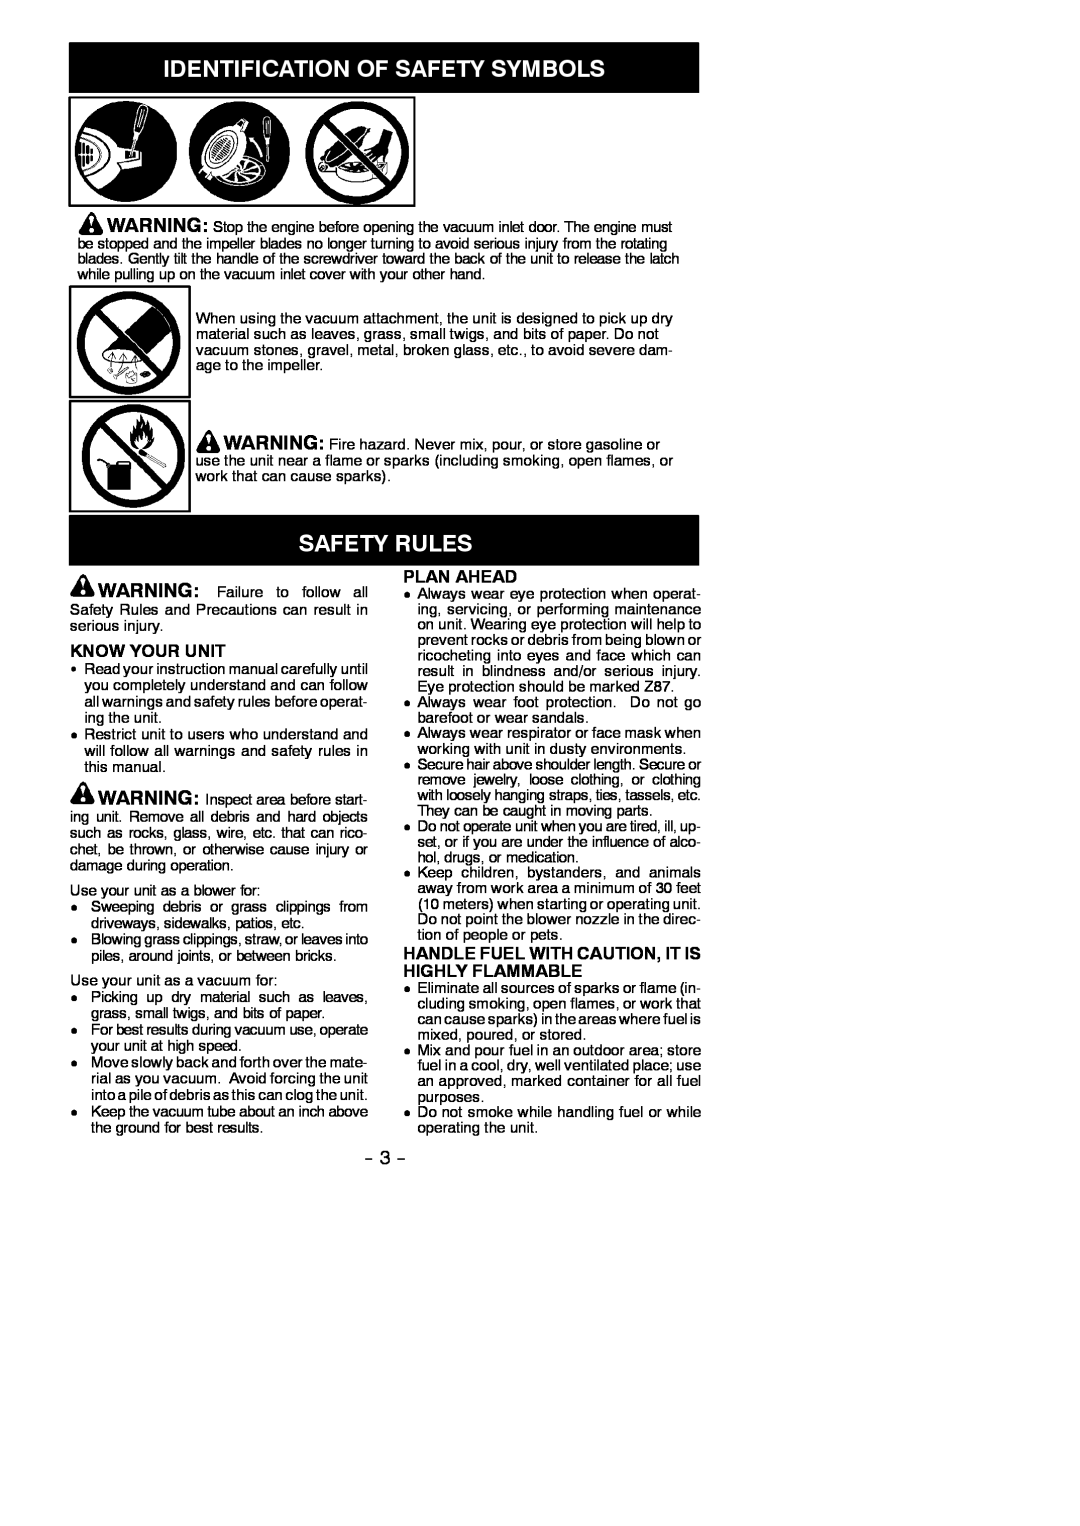 Poulan 545137219 instruction manual Safety Rules, Identification Of Safety Symbols, Know Your Unit, Plan Ahead 